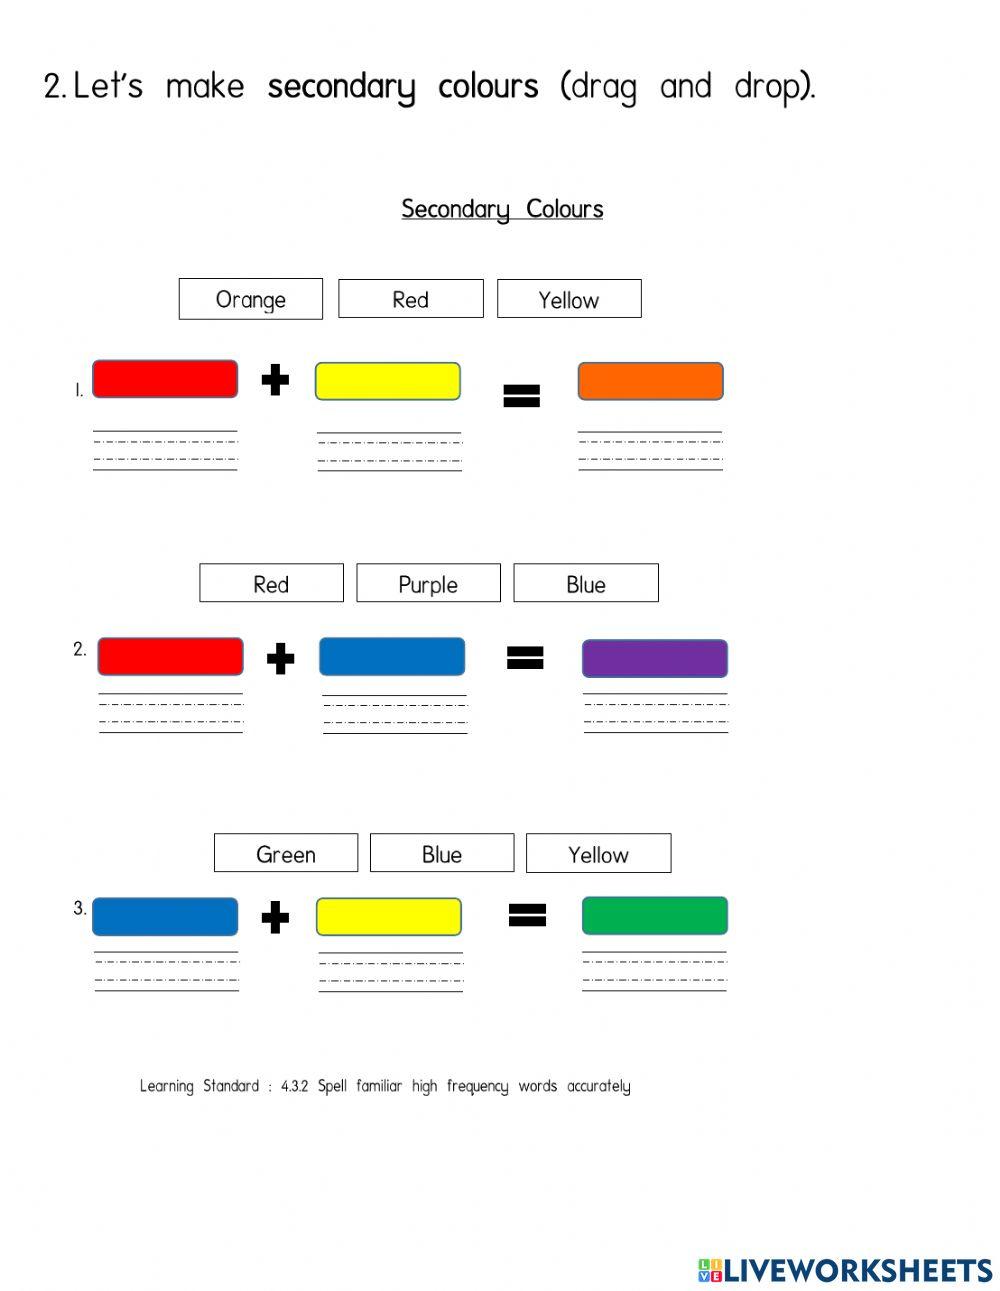 Year 1 primary and secondary colours